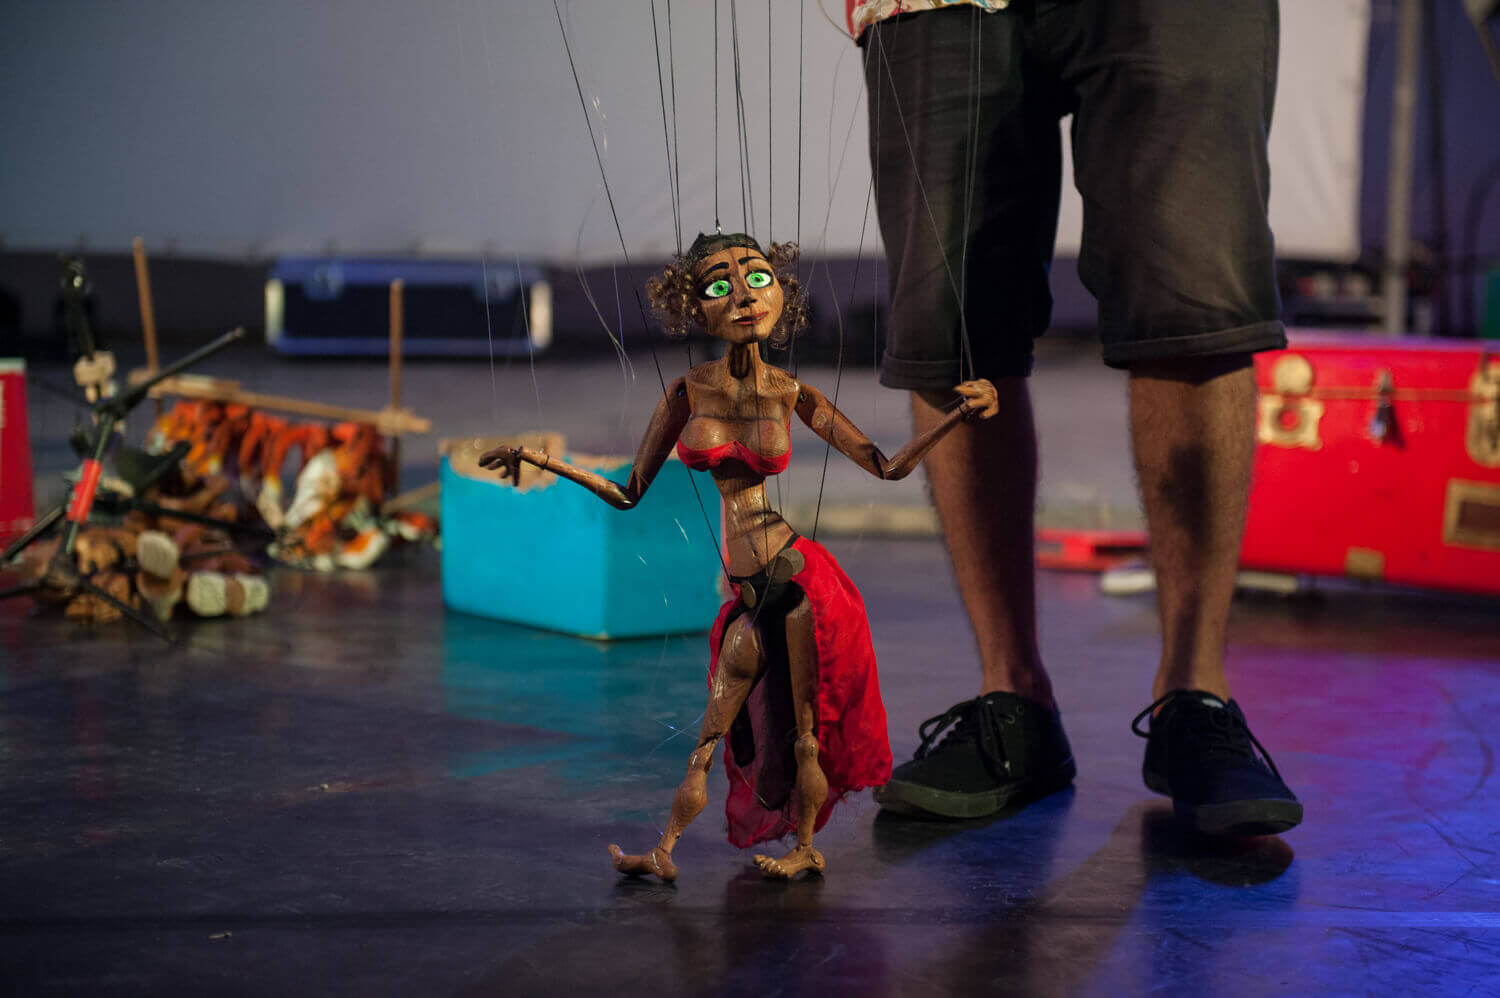 The gipsy marionettist